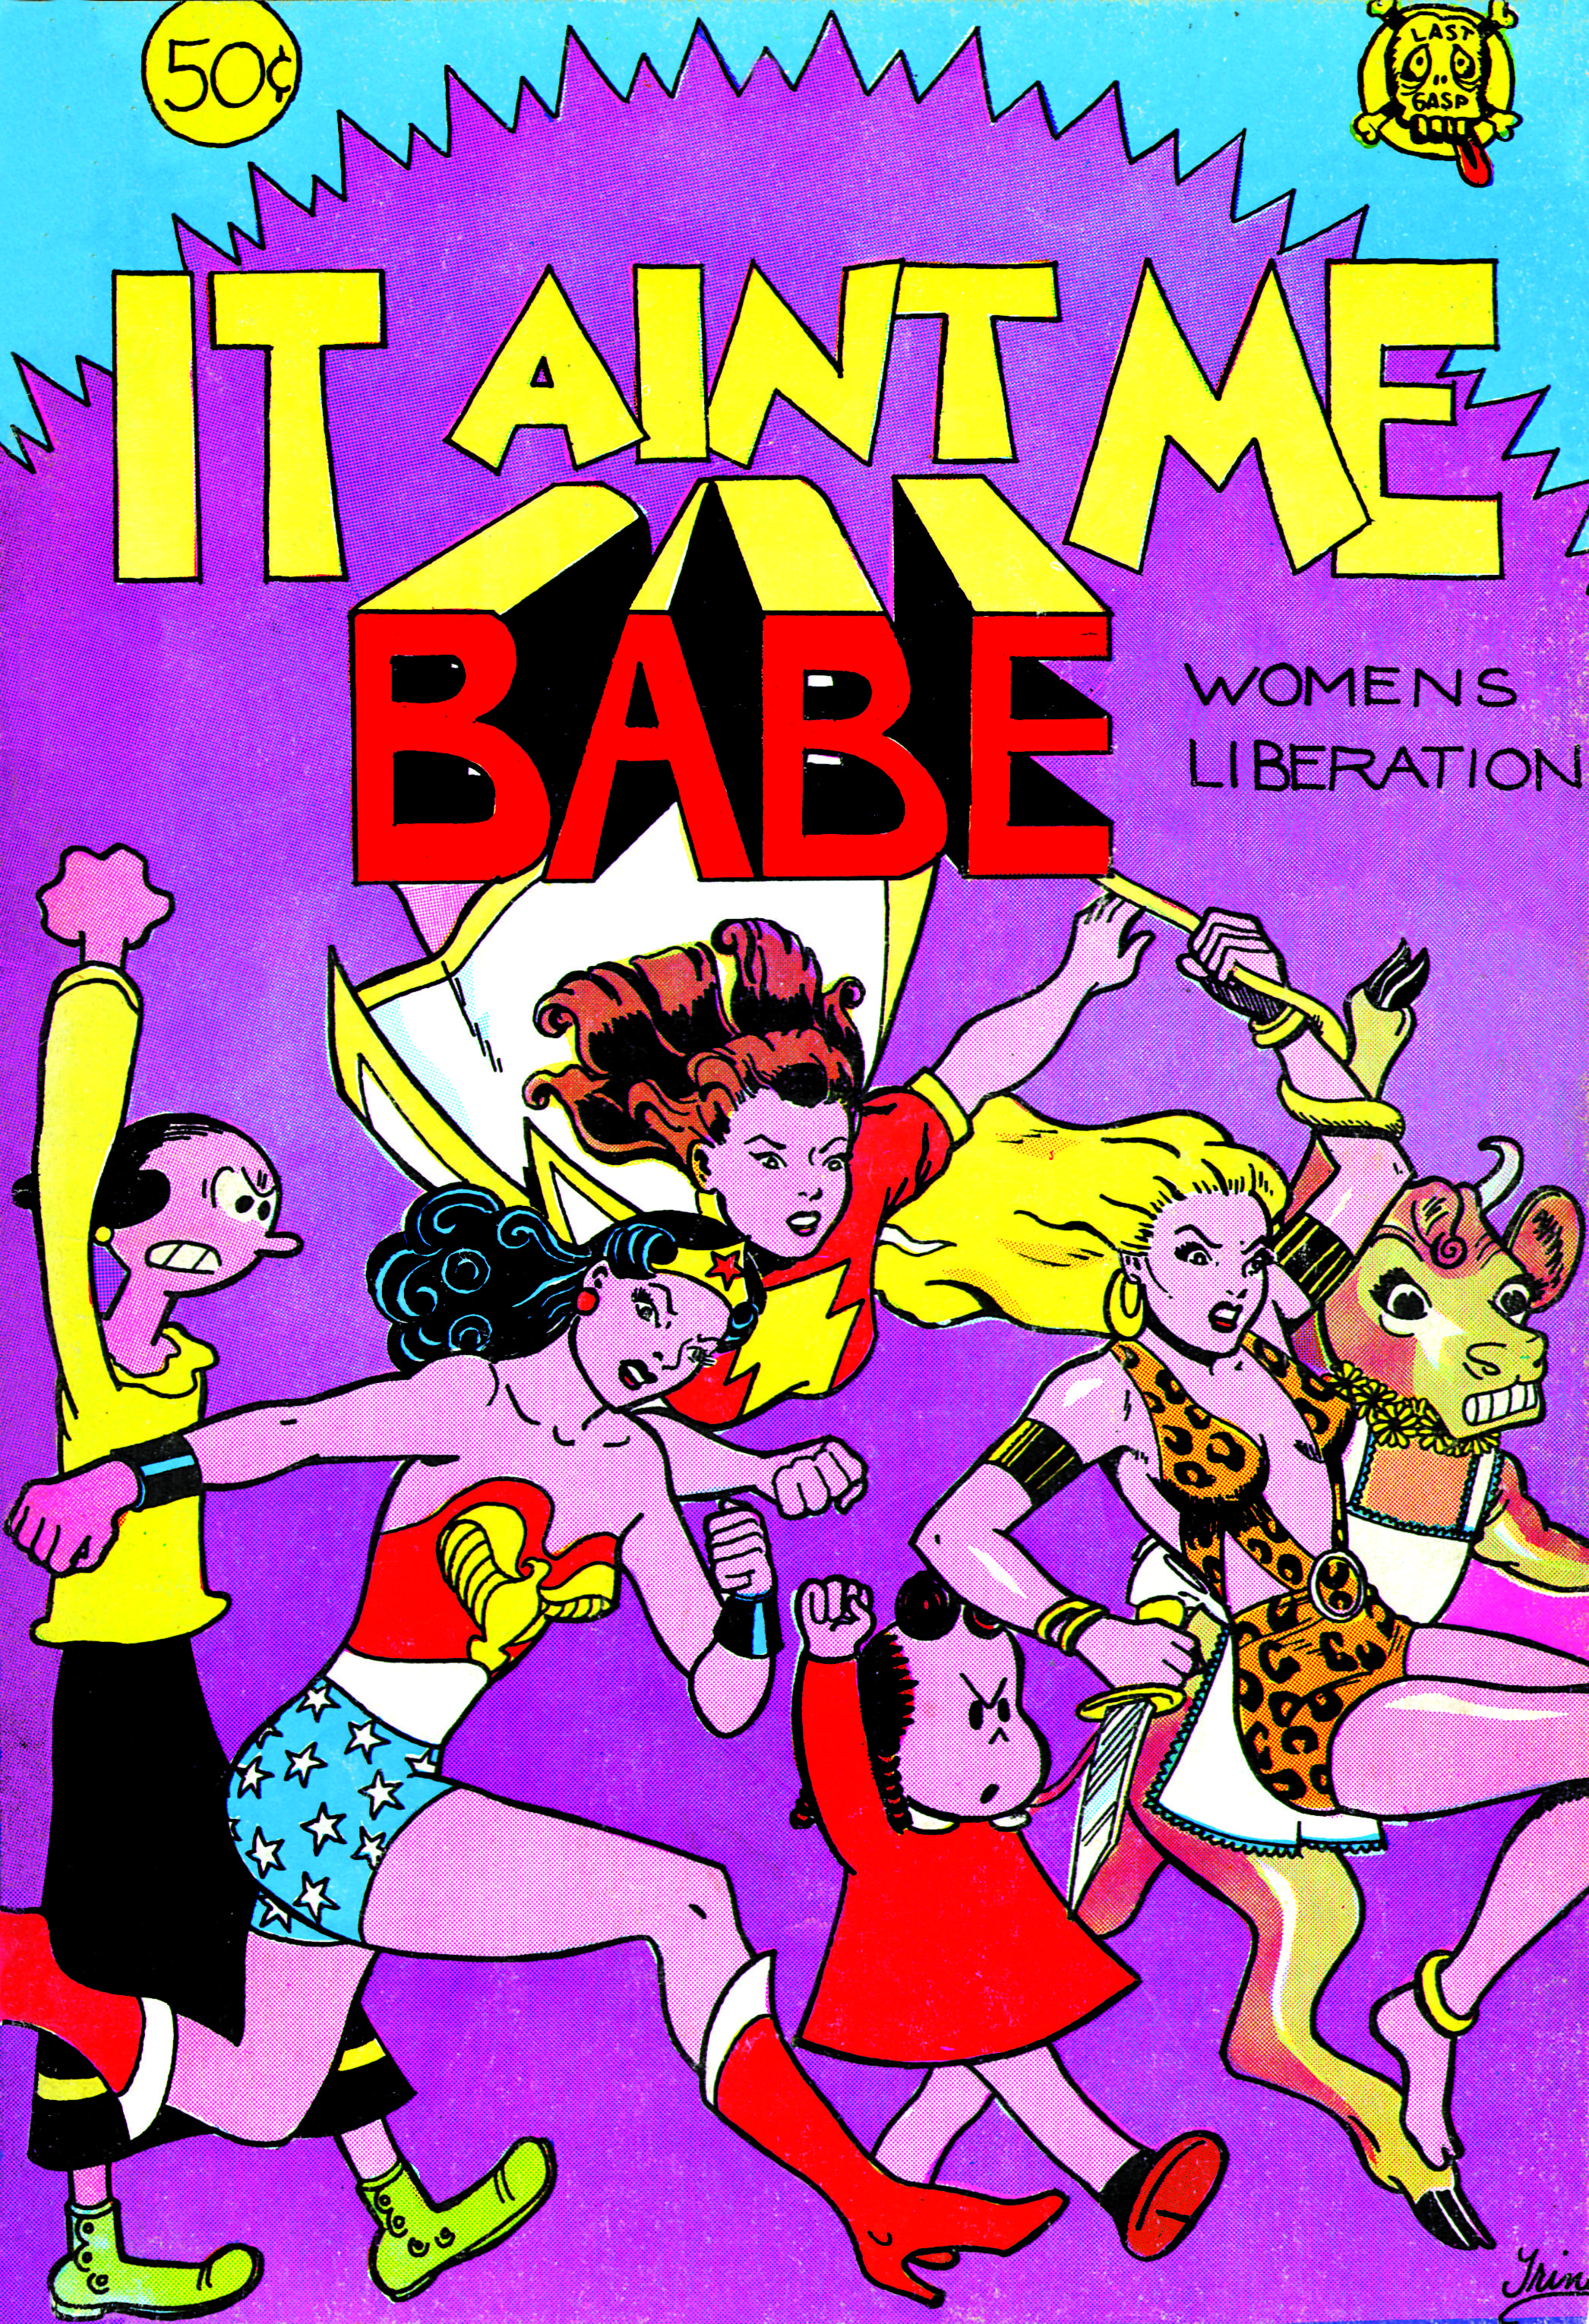 How Feminist Comic Book “Wimmen's Comix” Fought Chauvinism